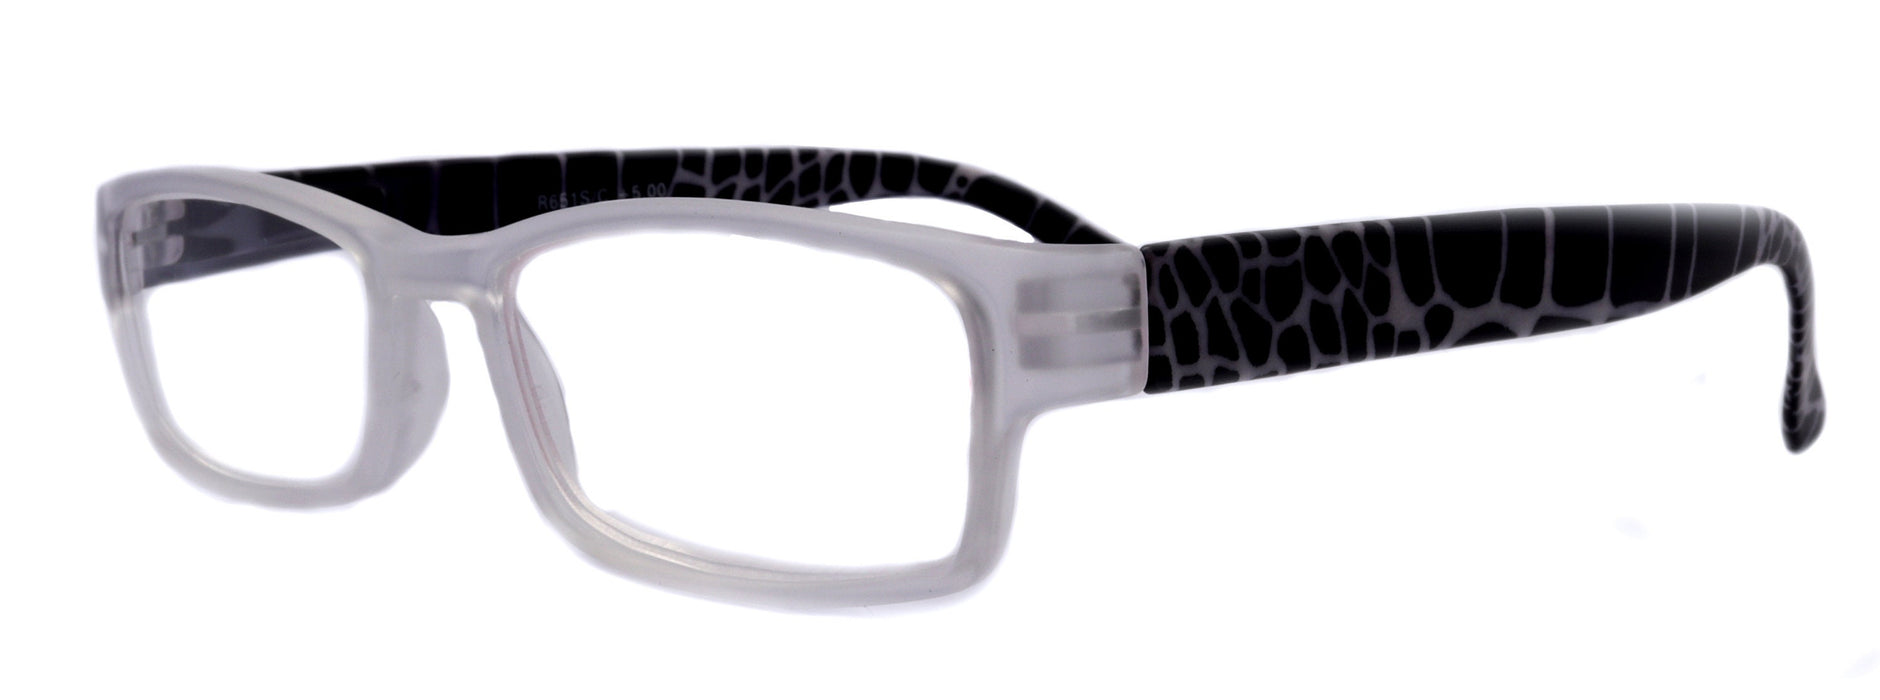 Xena, (Premium) Reading Glasses, Square Readers Clear Frosted +1.25.. +6 High / Strong Magnifying Eyeglasses (Black Giraffe) NY Fifth Avenue